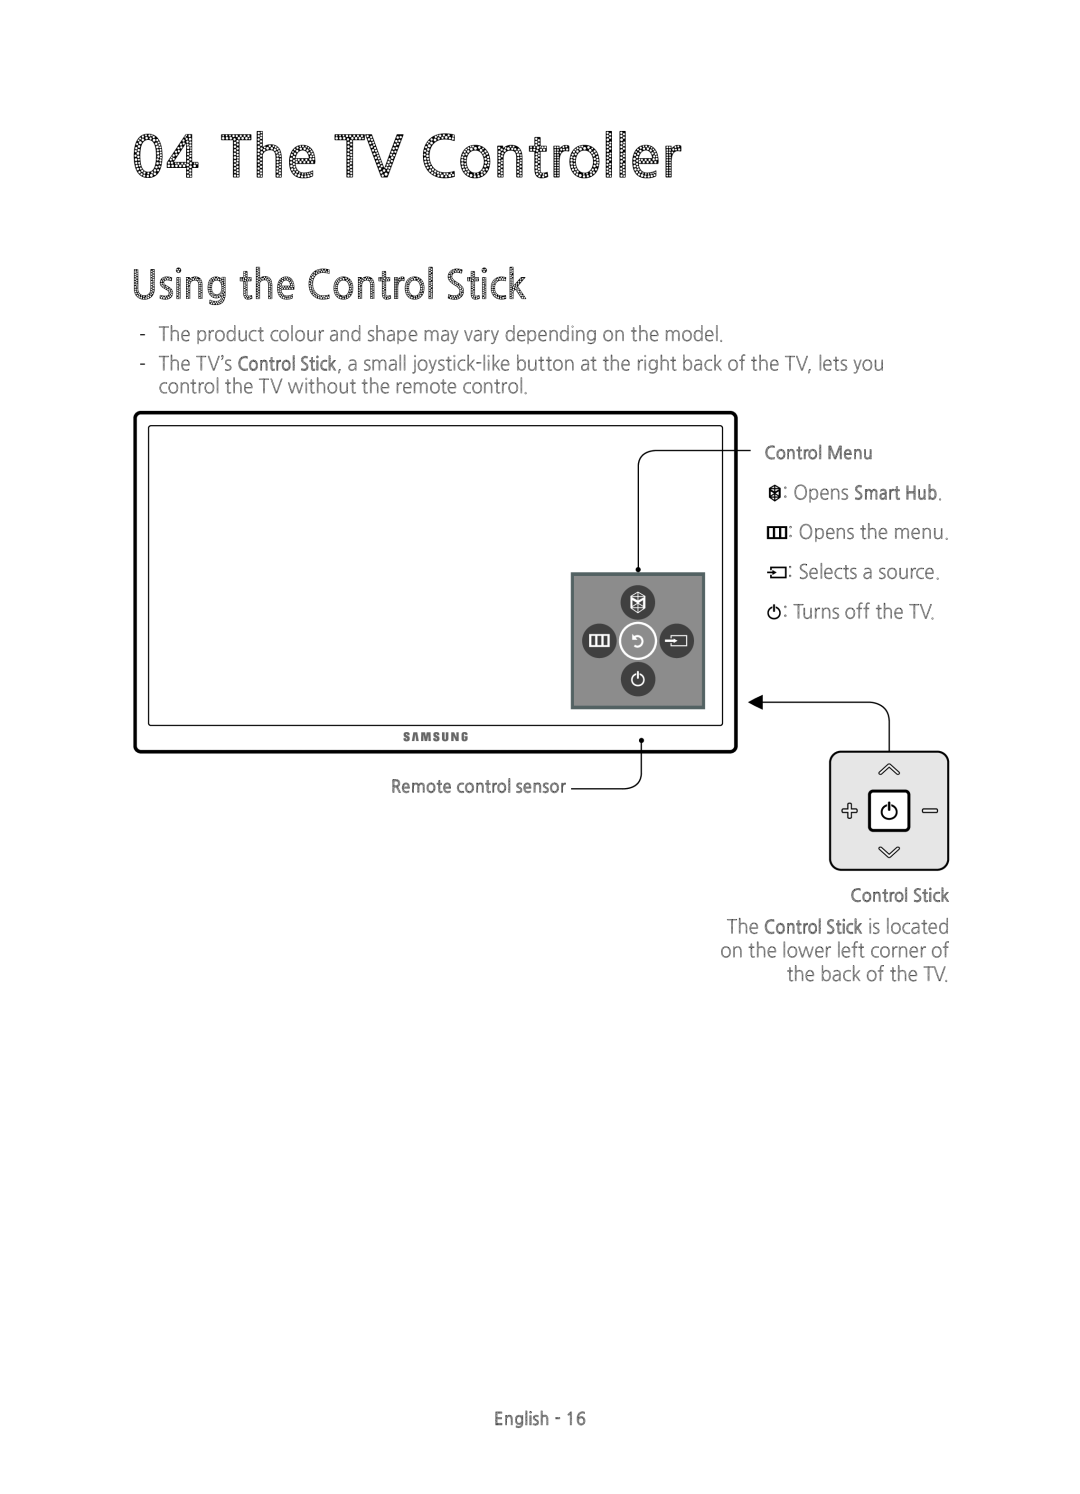 Samsung UE48JS8500TXXC, UE55JS8500TXXC, UE48JS8500TXZF, UE55JS8500TXZF manual The TV Controller, Using the Control Stick 